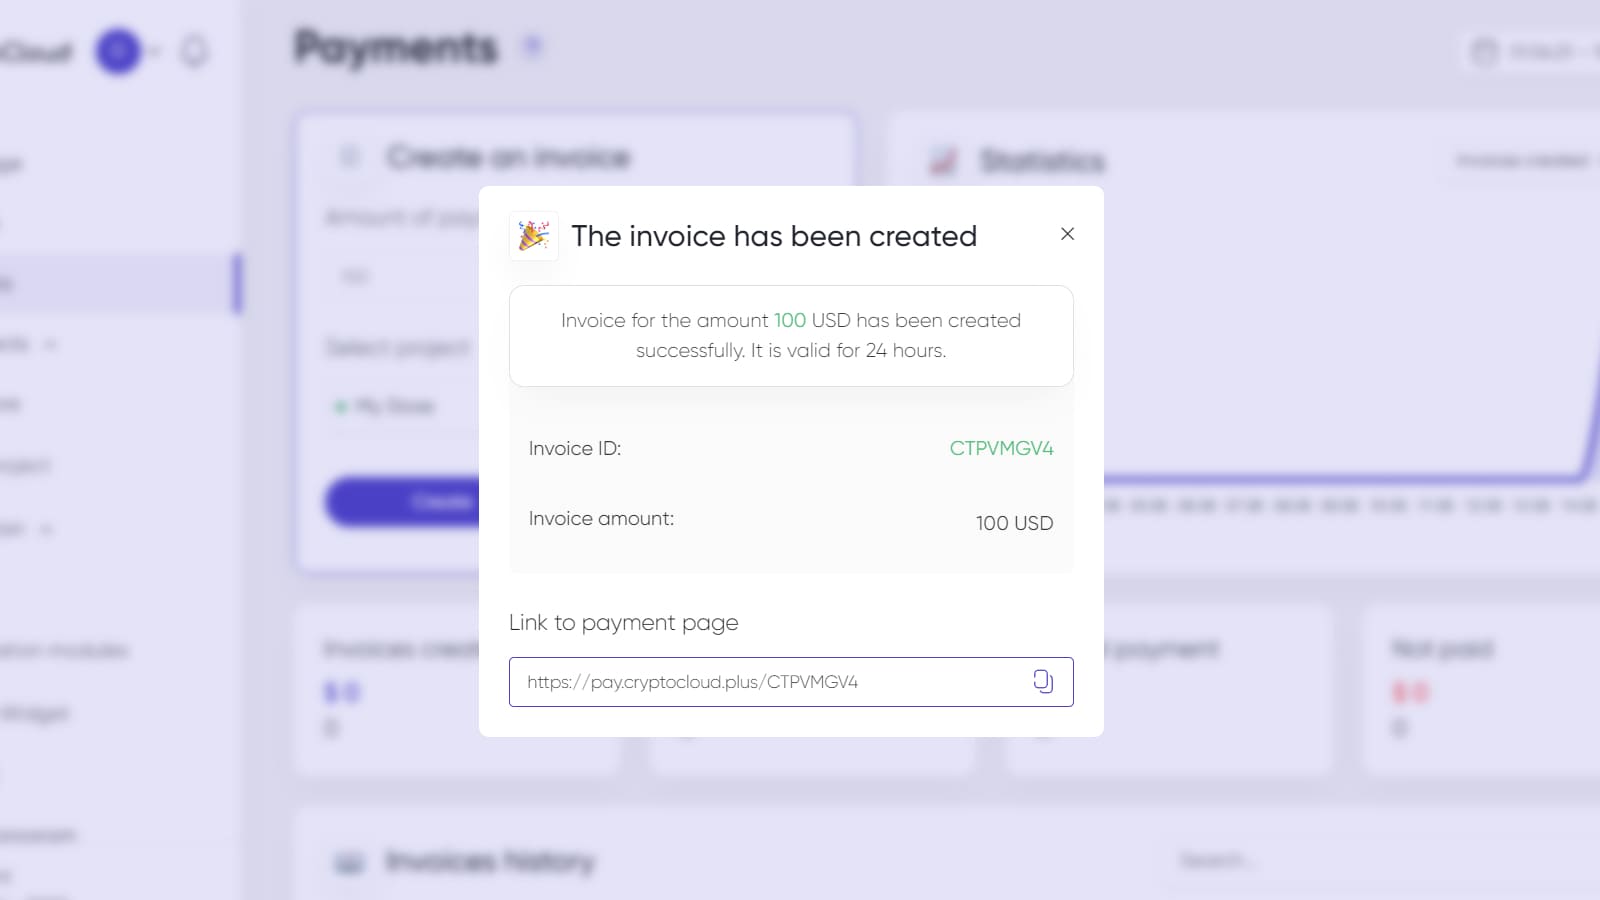 Invoicing in the form of a link to payment in cryptocurrency in CryptoCloud.